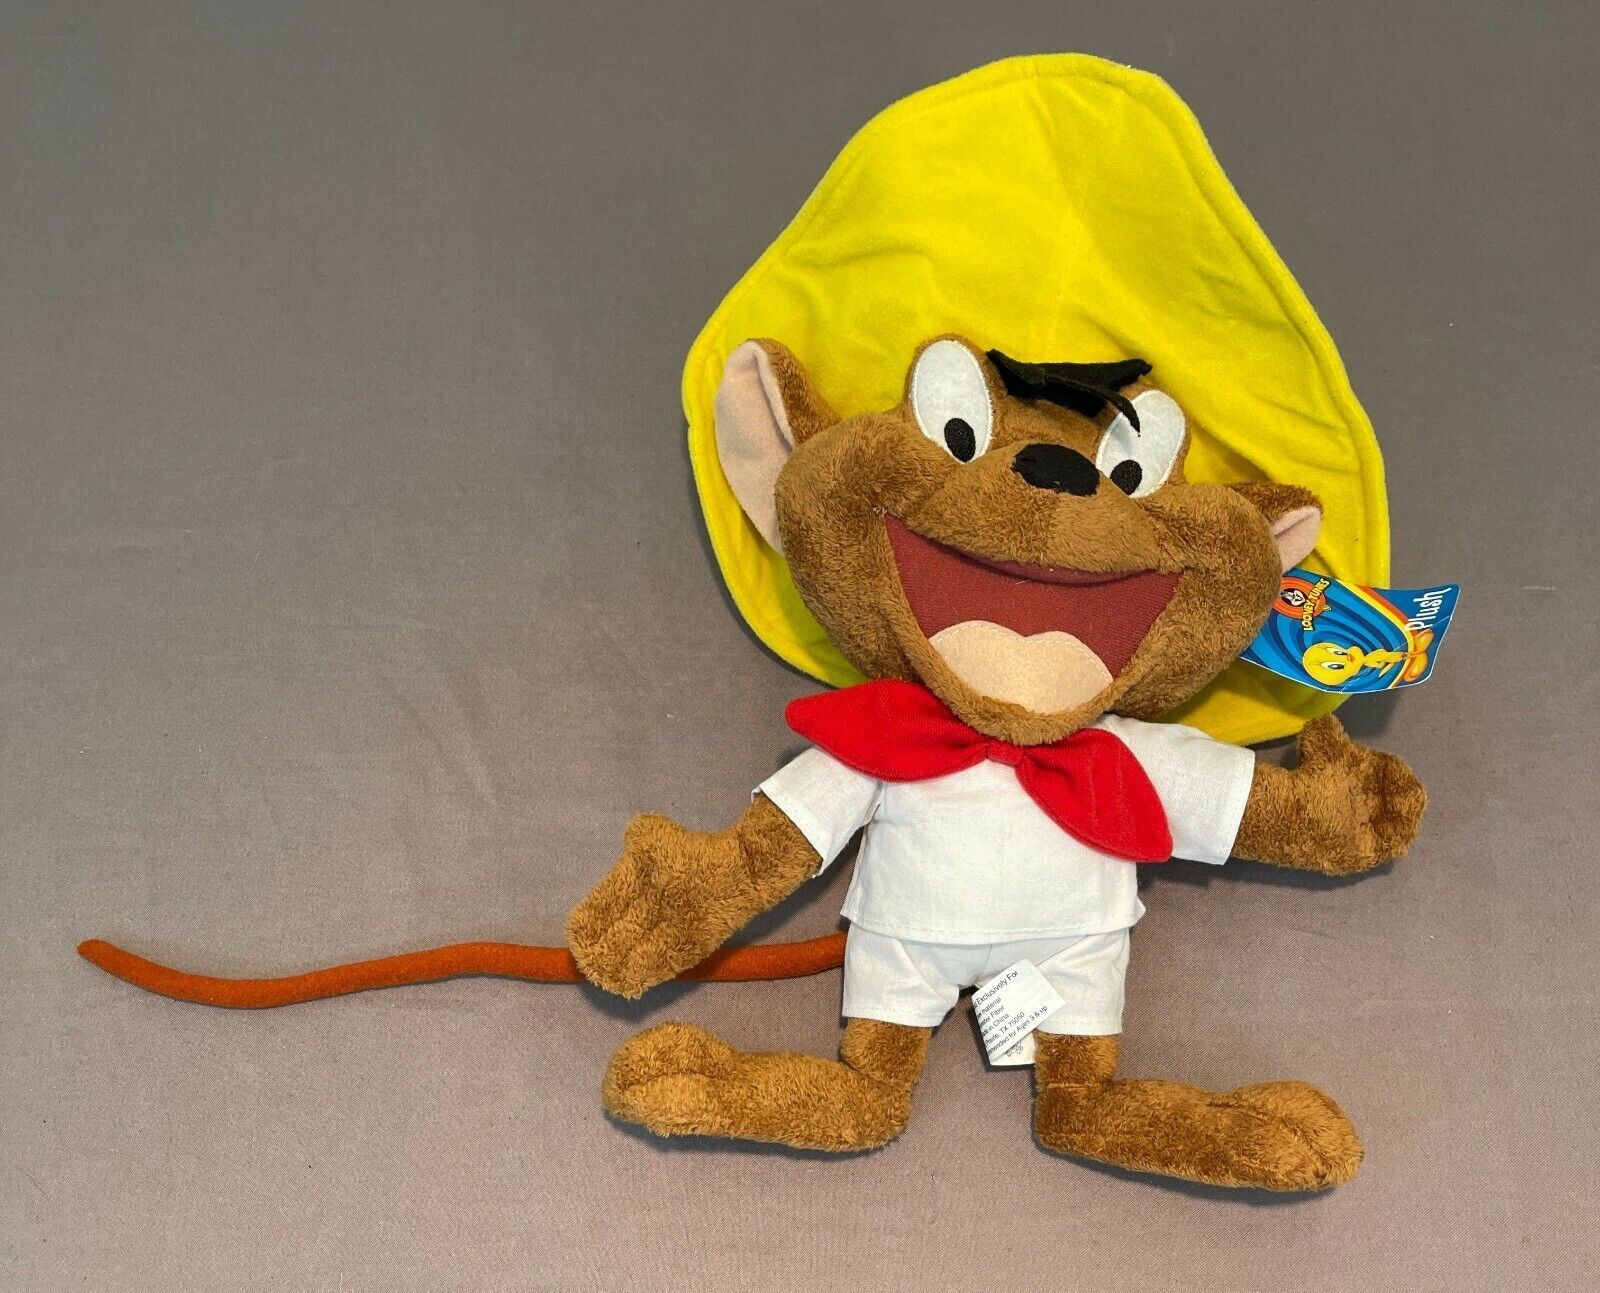 Primary image for Six Flags Looney Tunes Speedy Gonzales Stuffed Plush Toy Stuffed Animal Yellow